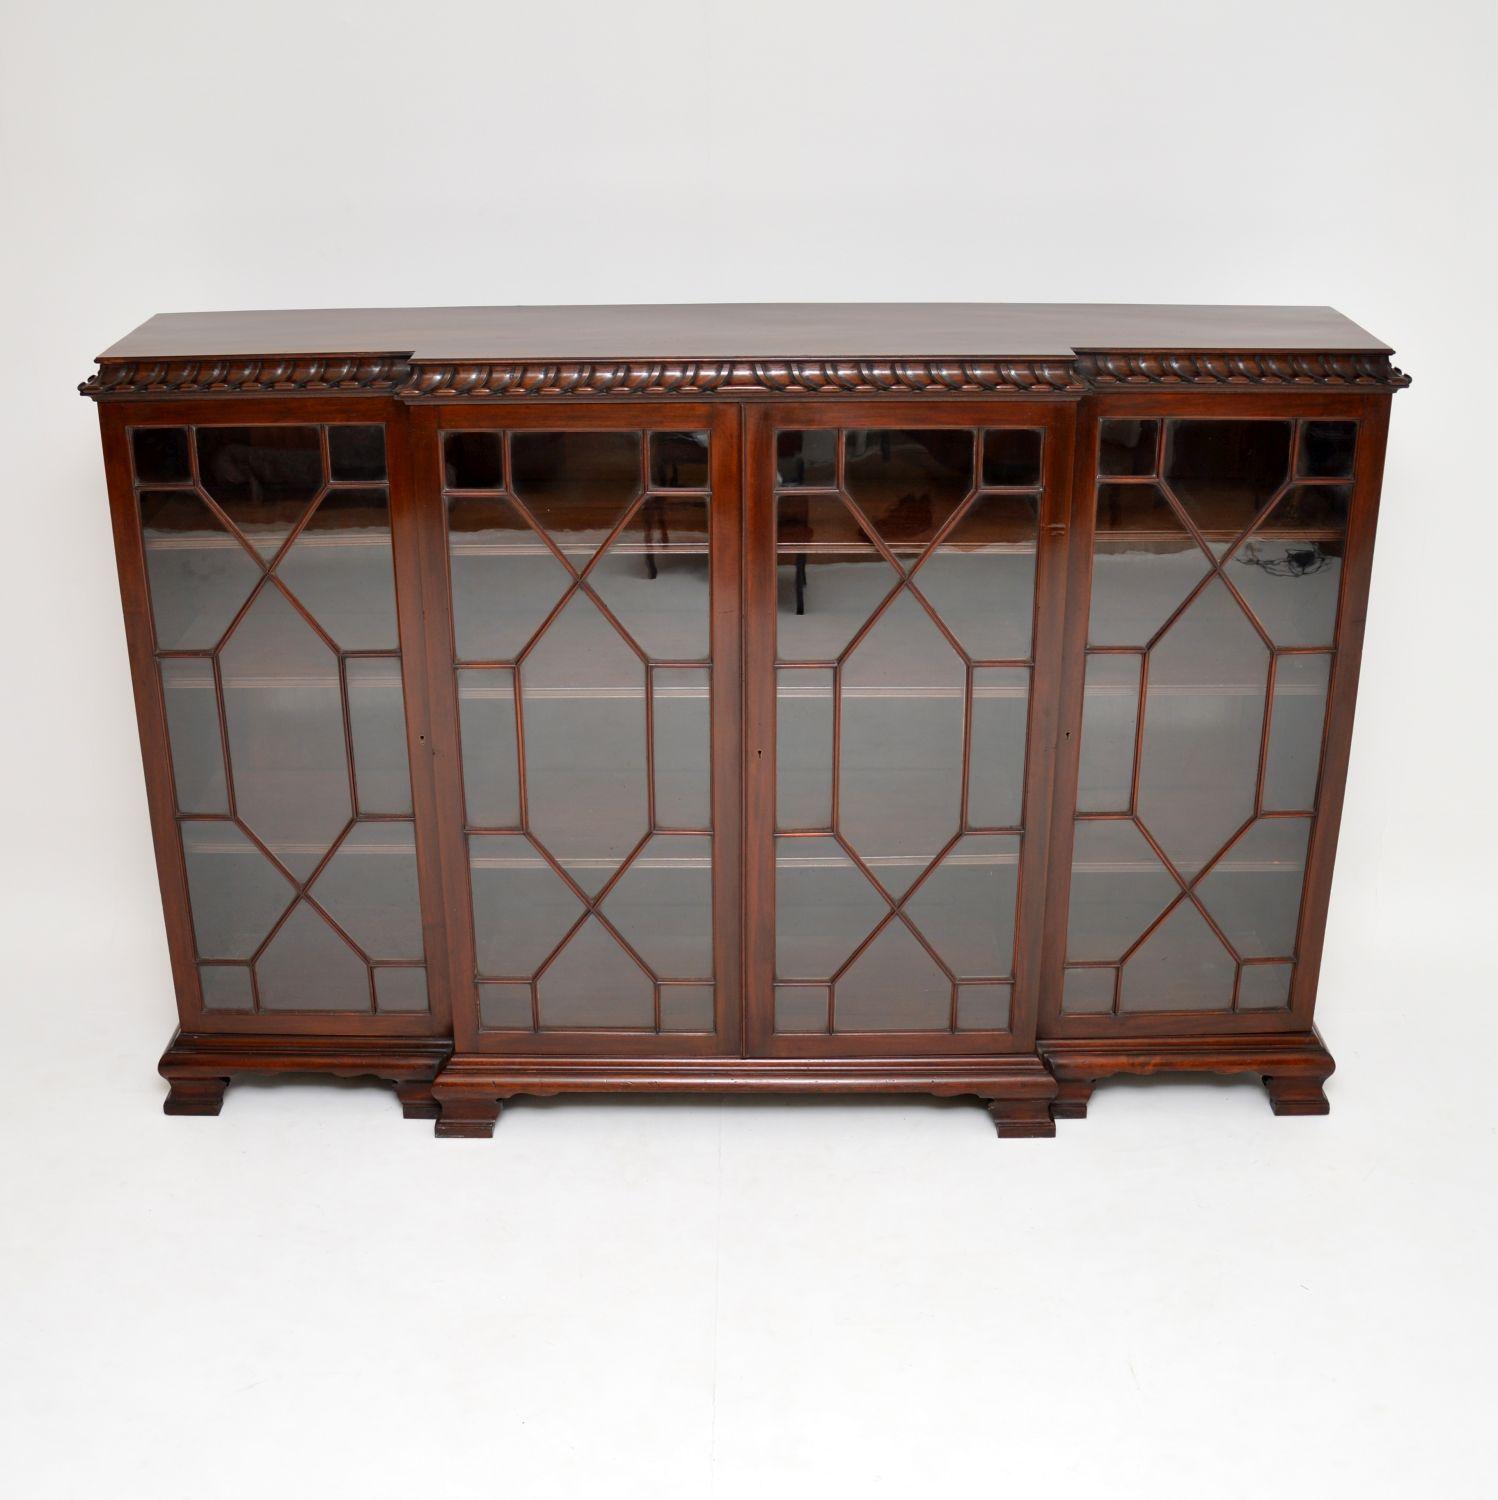 Very strong looking & practicable solid mahogany antique breakfront bookcase in the Chippendale style, dating from around the 1910 period & in excellent condition.

It has a spectacularly scalloped out & carved top edge, which is very distinctive